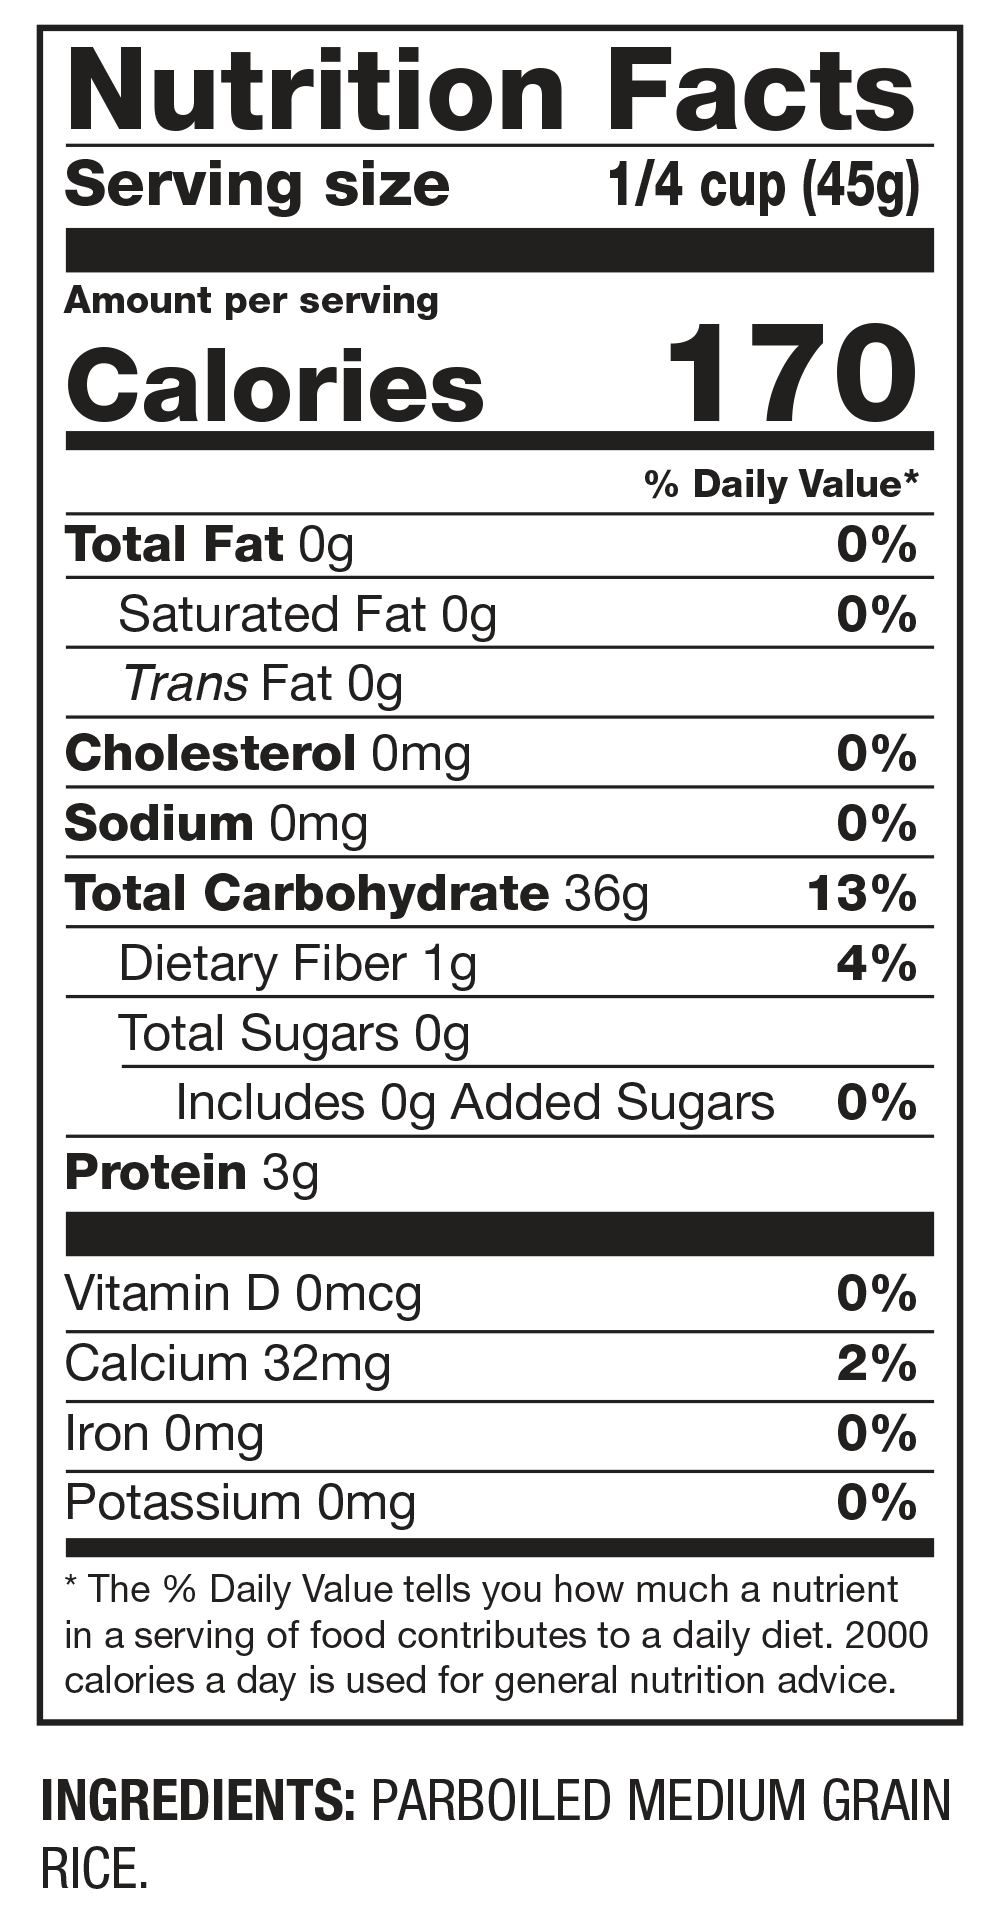 Nutrition Facts Parboiled Medium Grain Rice